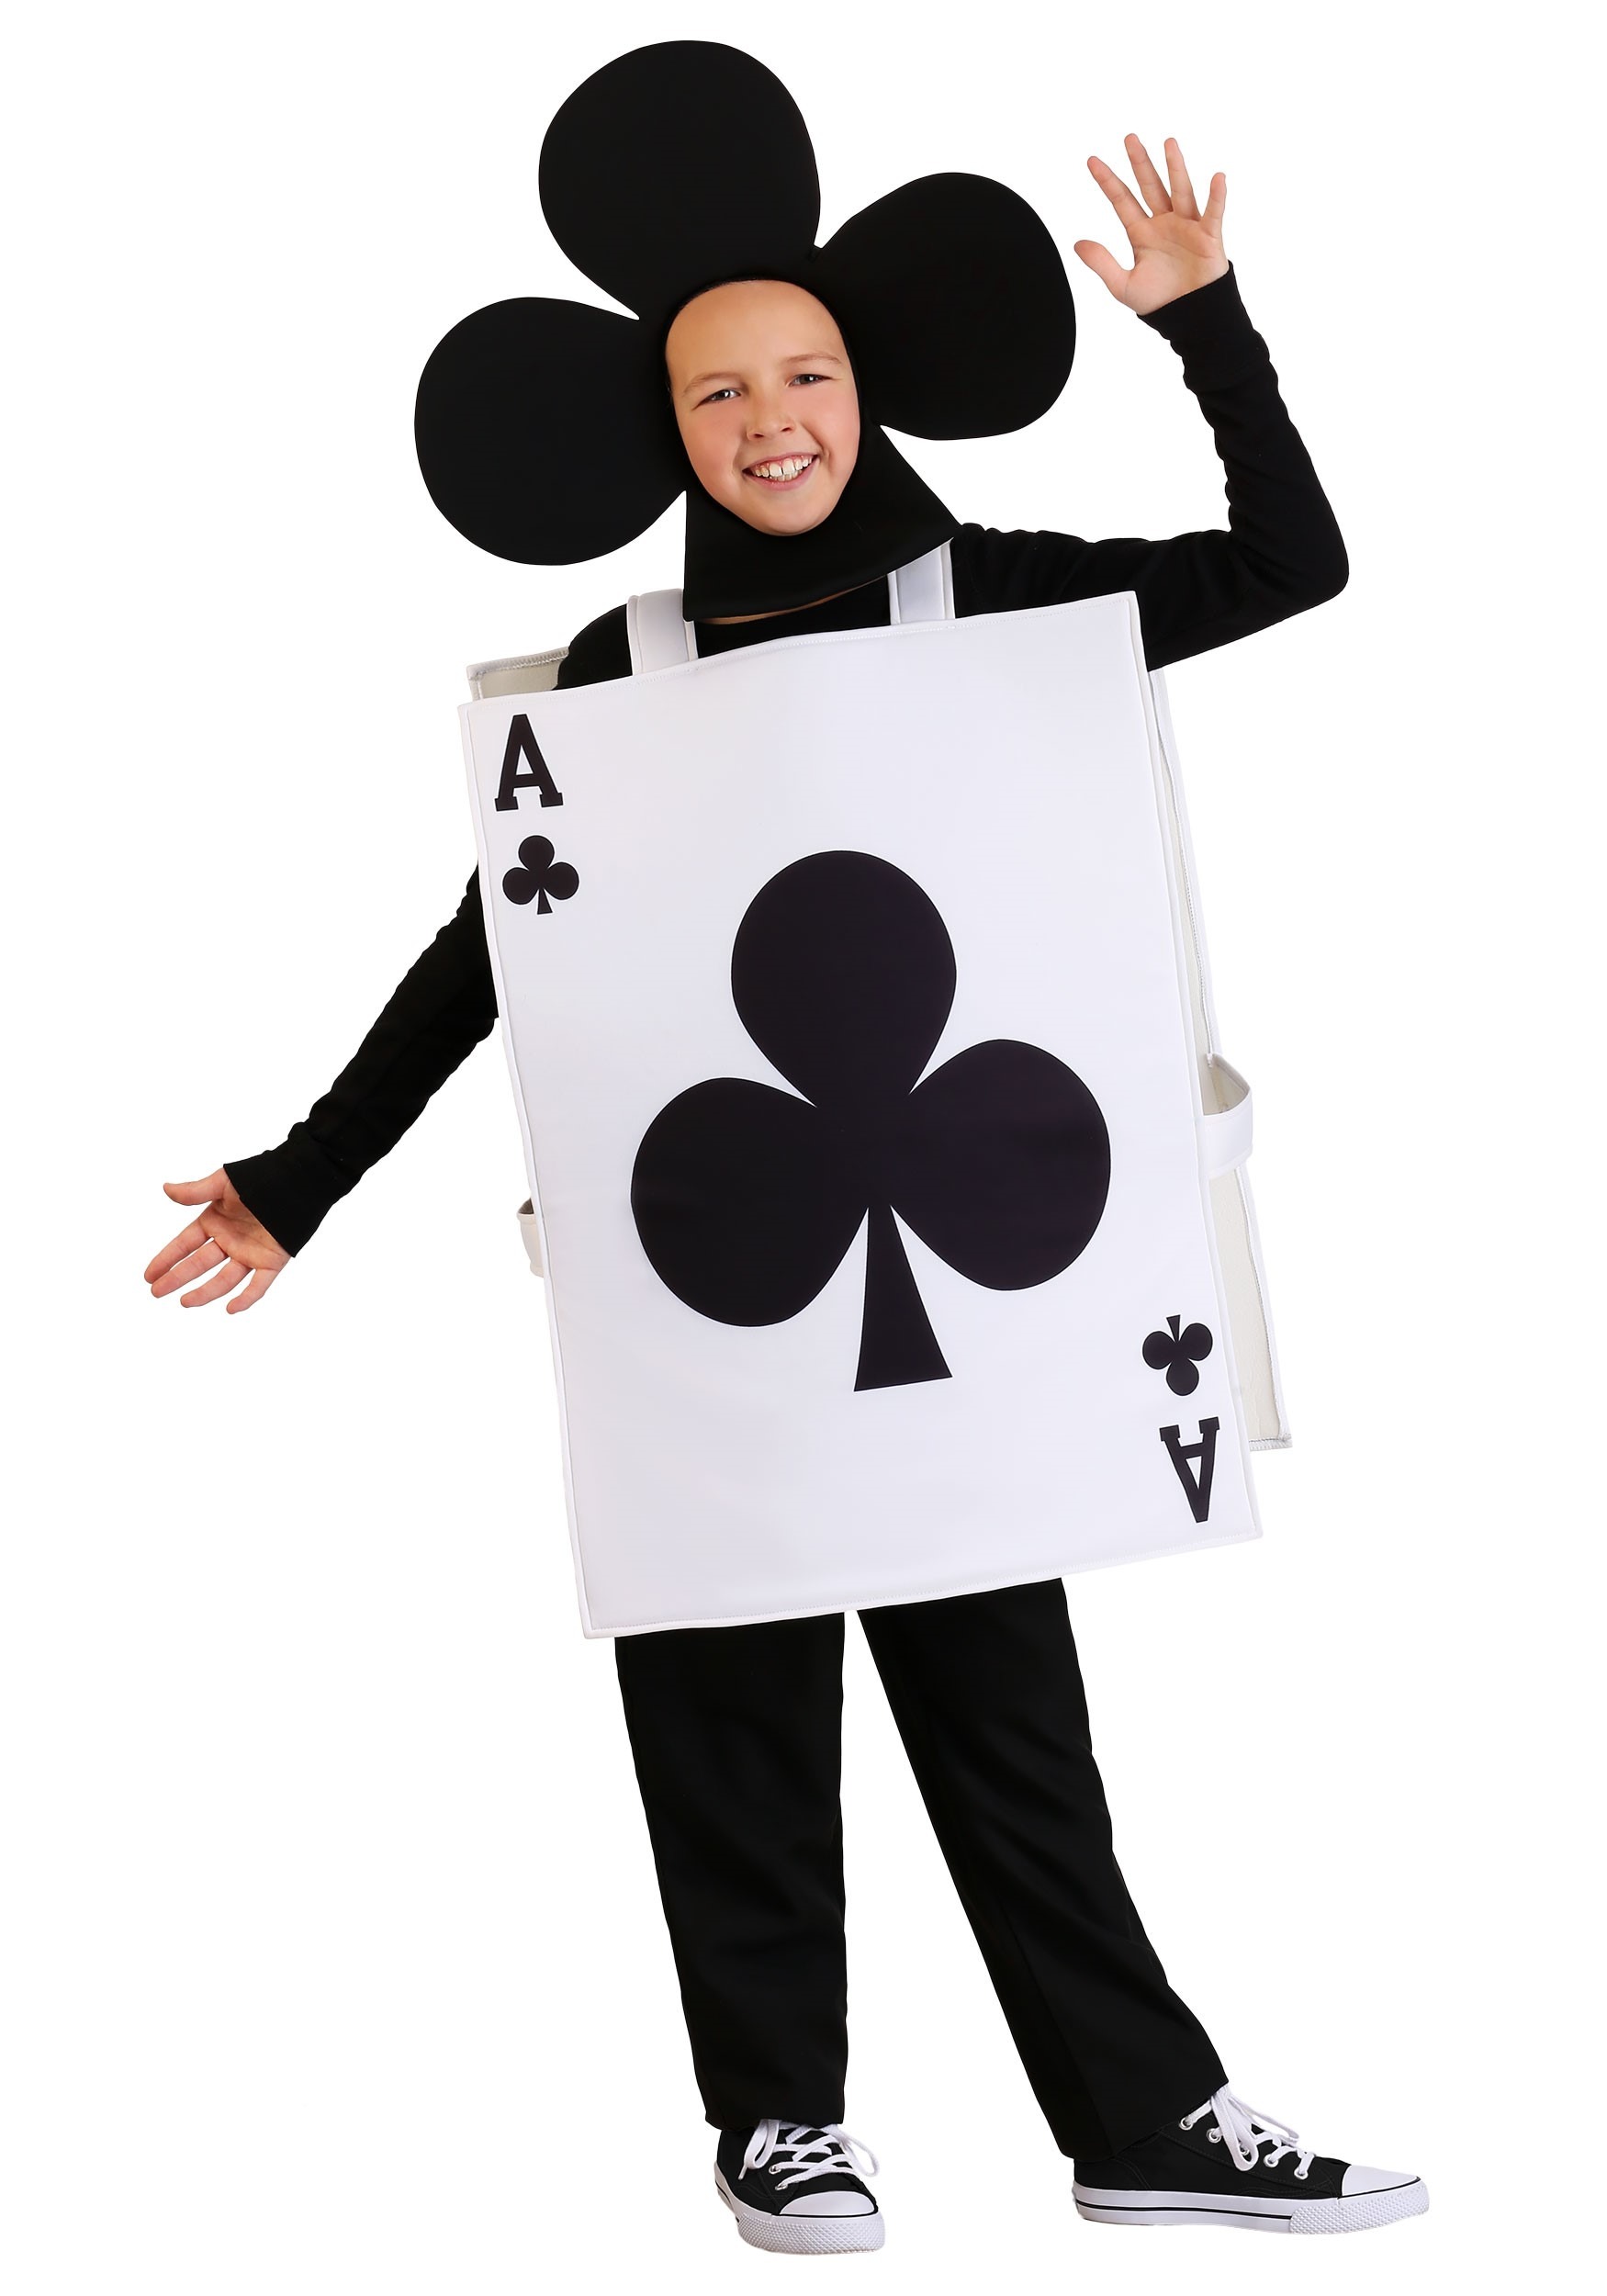 Ace of Clubs Kid's Costume